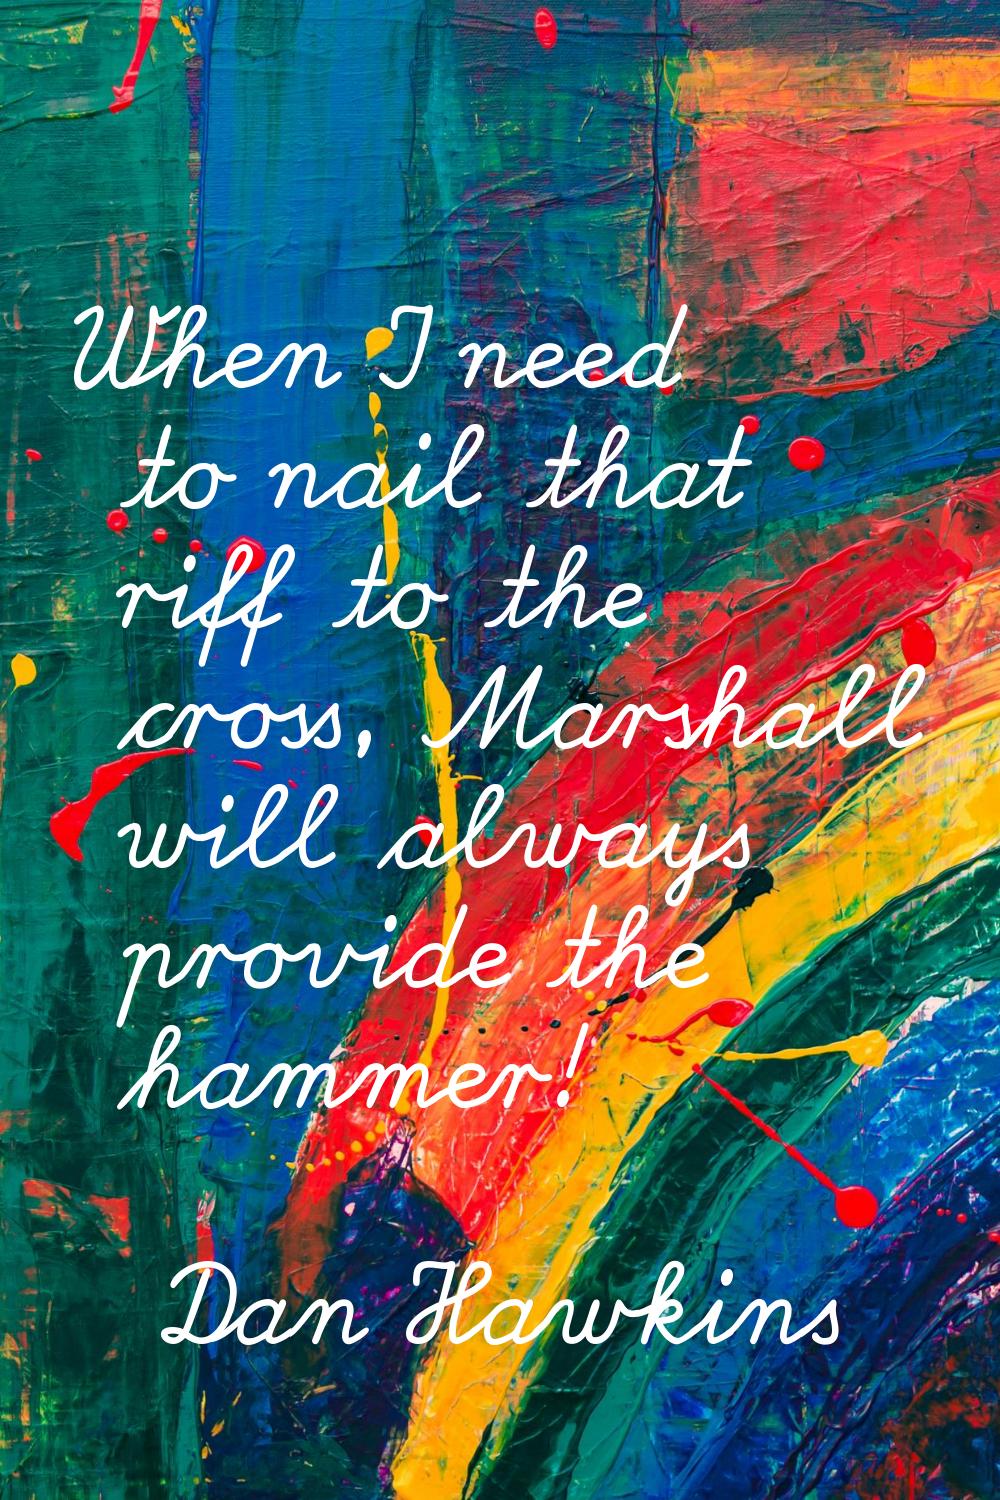 When I need to nail that riff to the cross, Marshall will always provide the hammer!